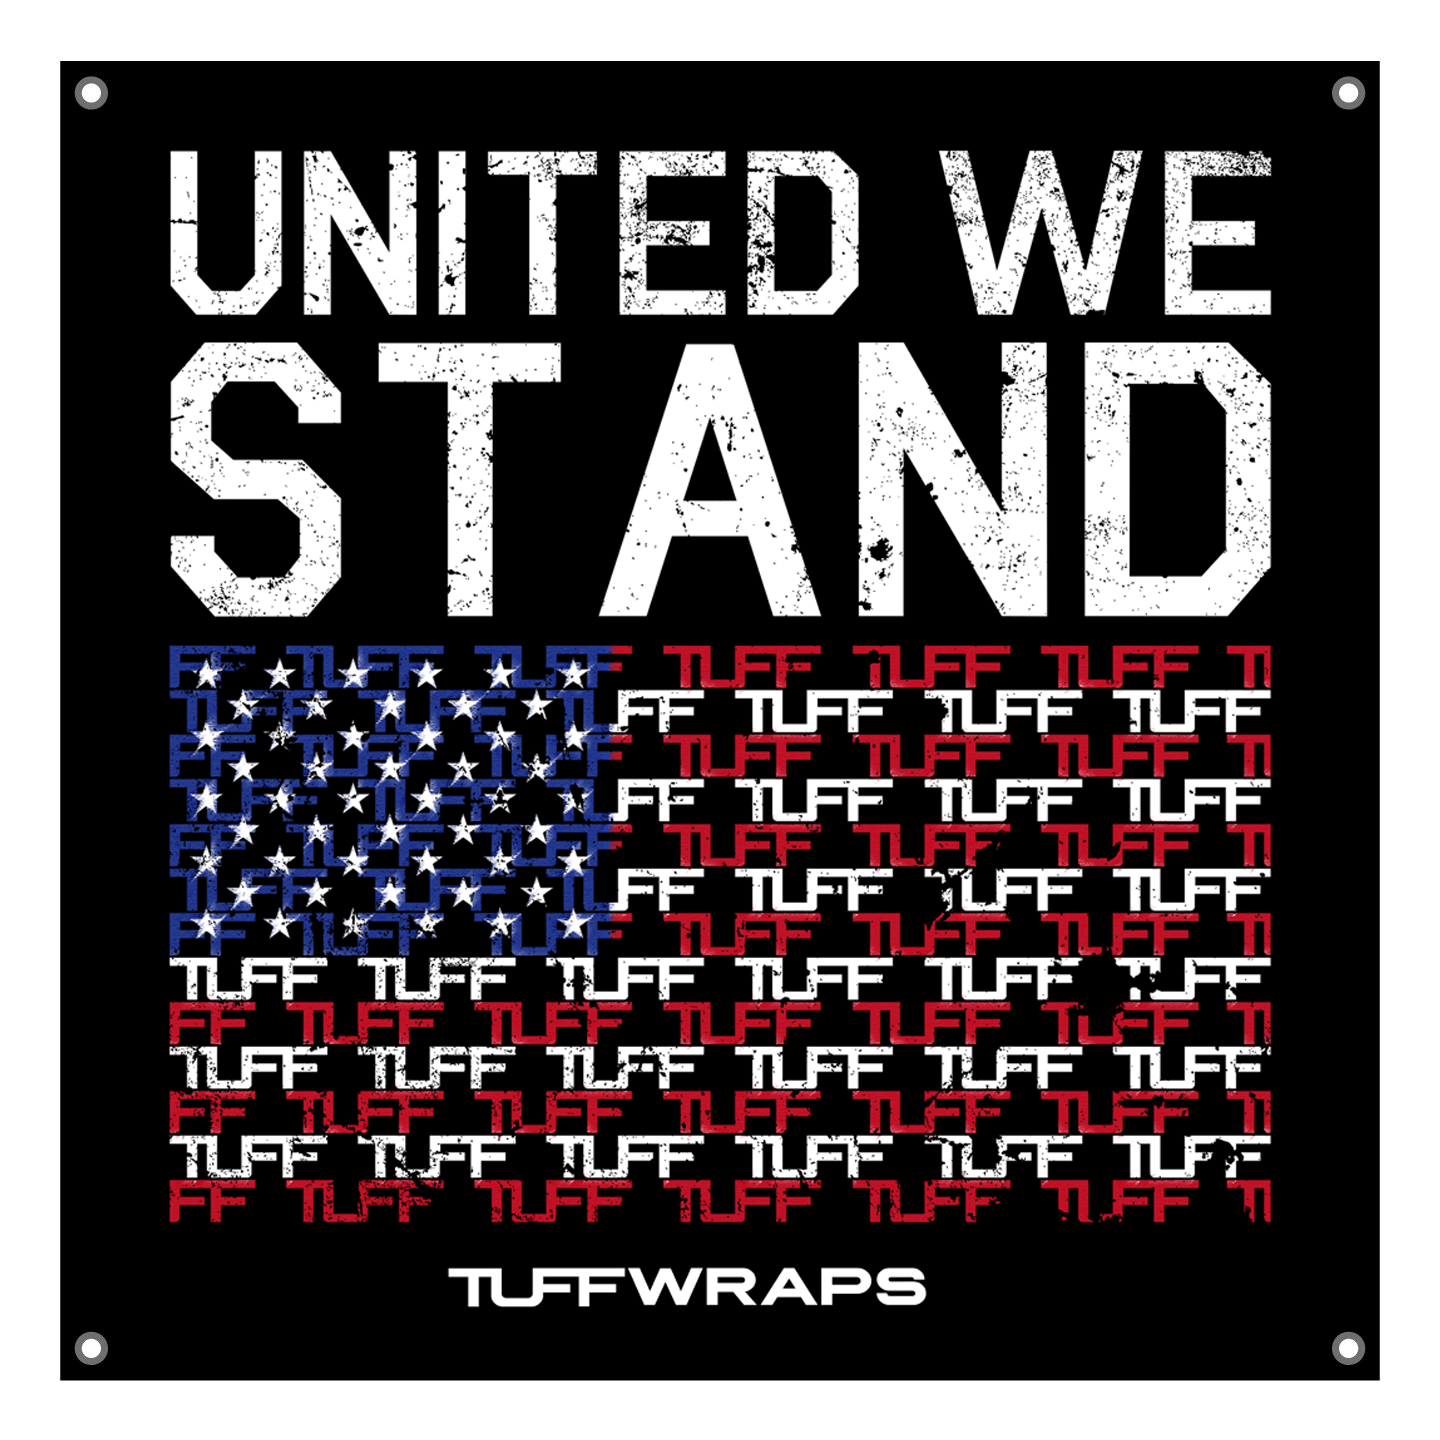 United We Stand 3x3 Wall Banner TuffWraps.com